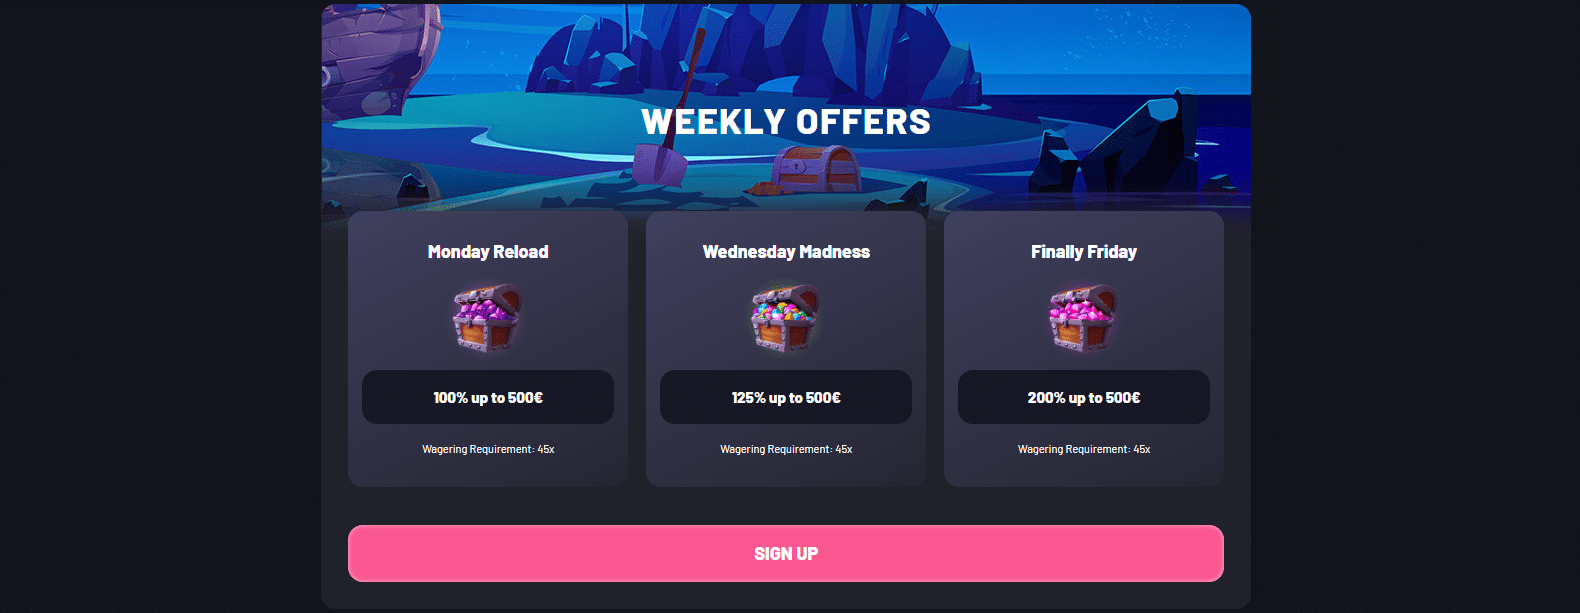 seven casino - weekly offer